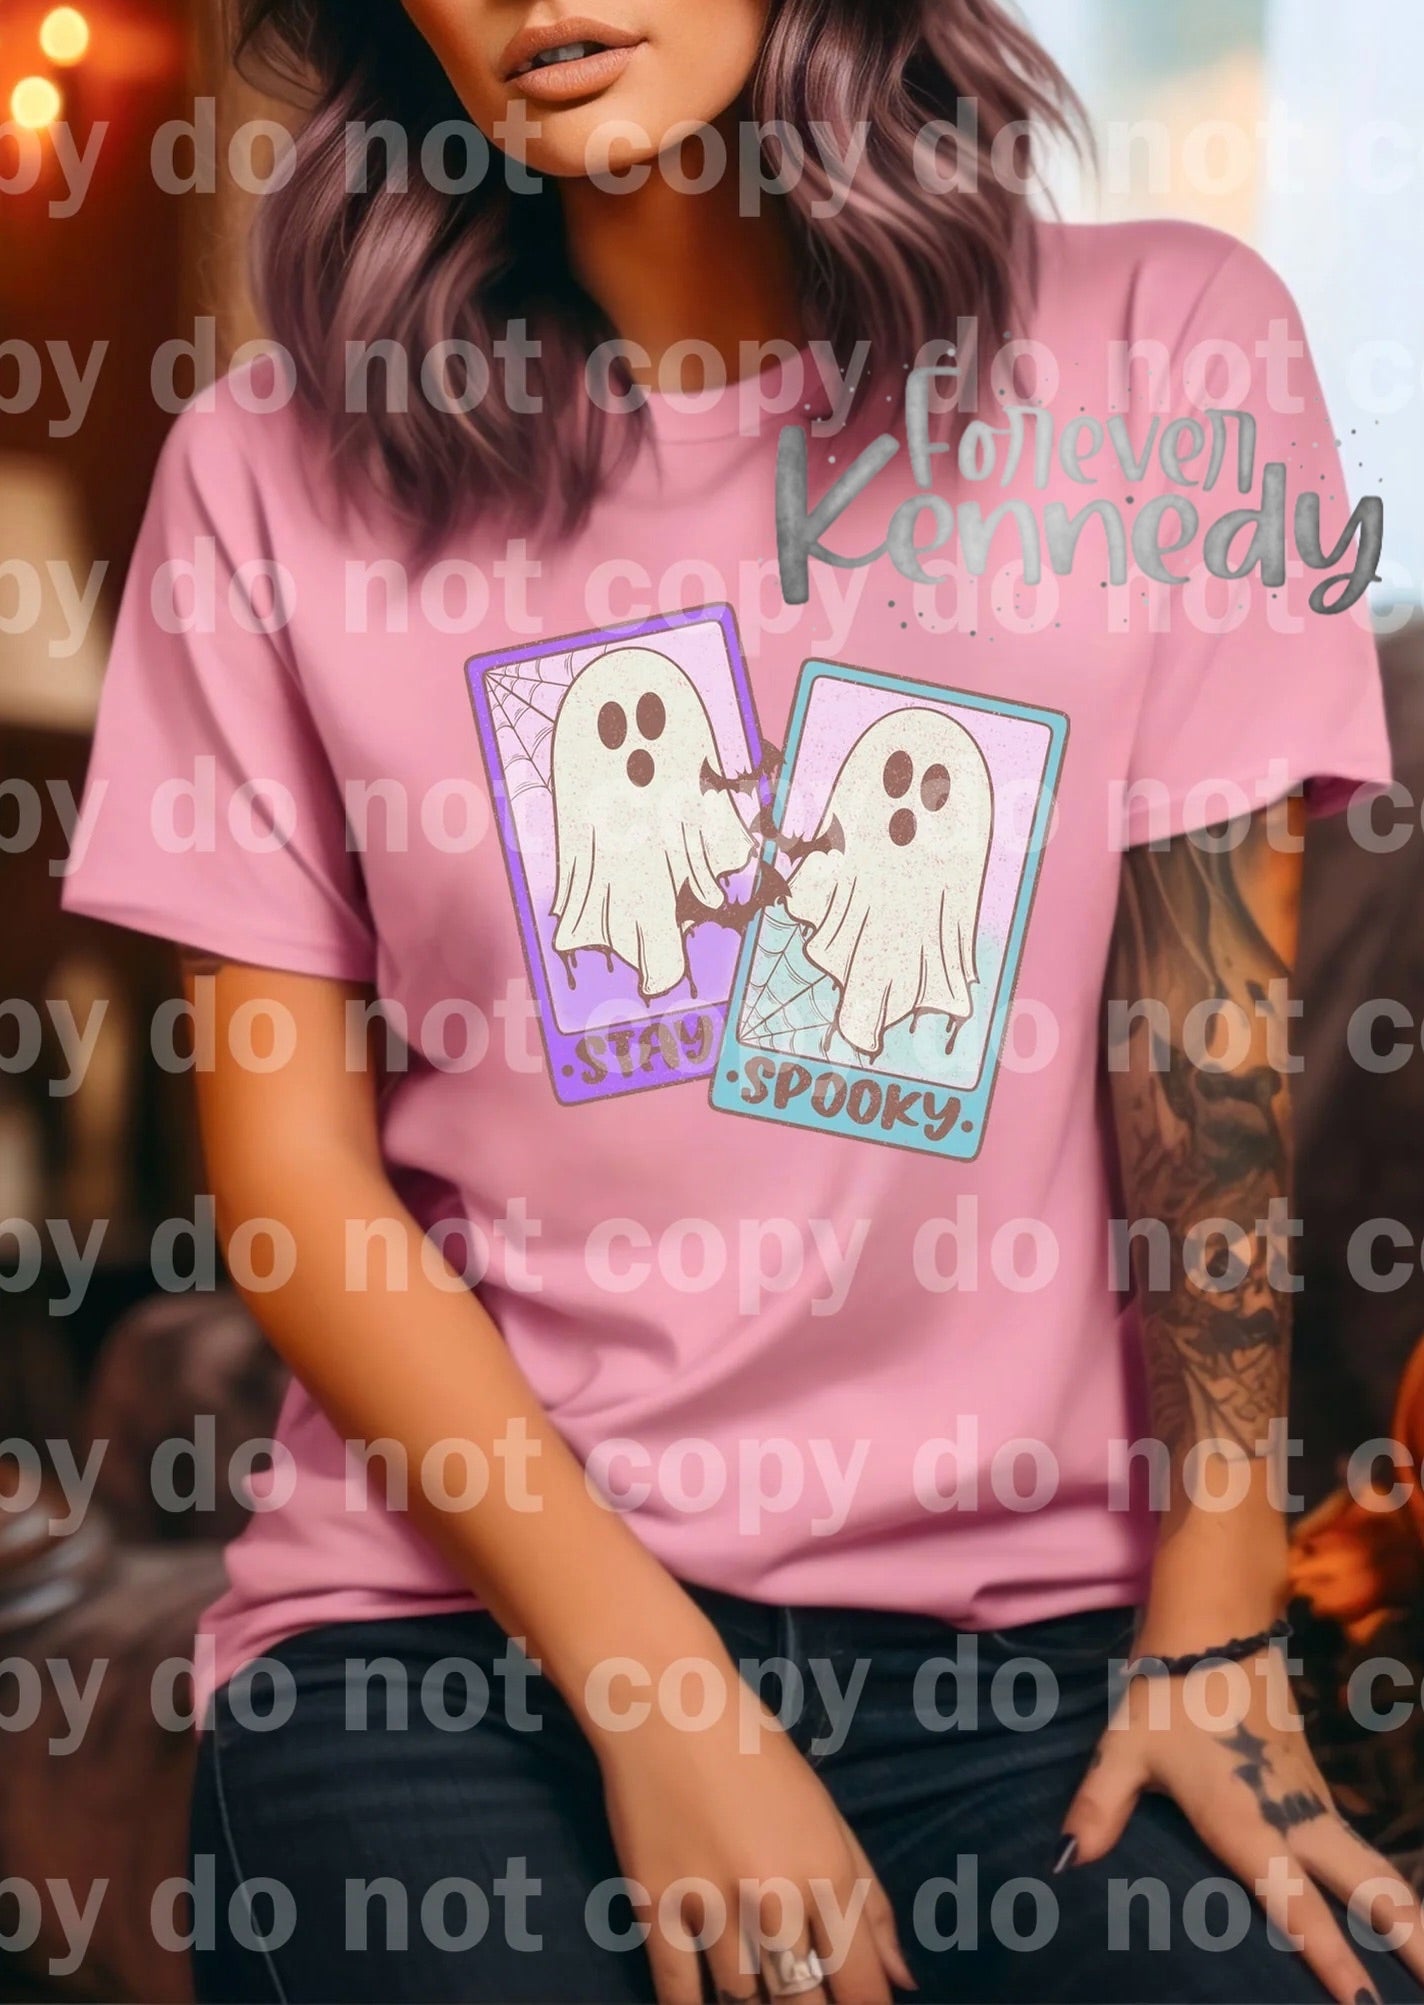 (MTO) Pick Your Apparel: Stay spooky ghosts